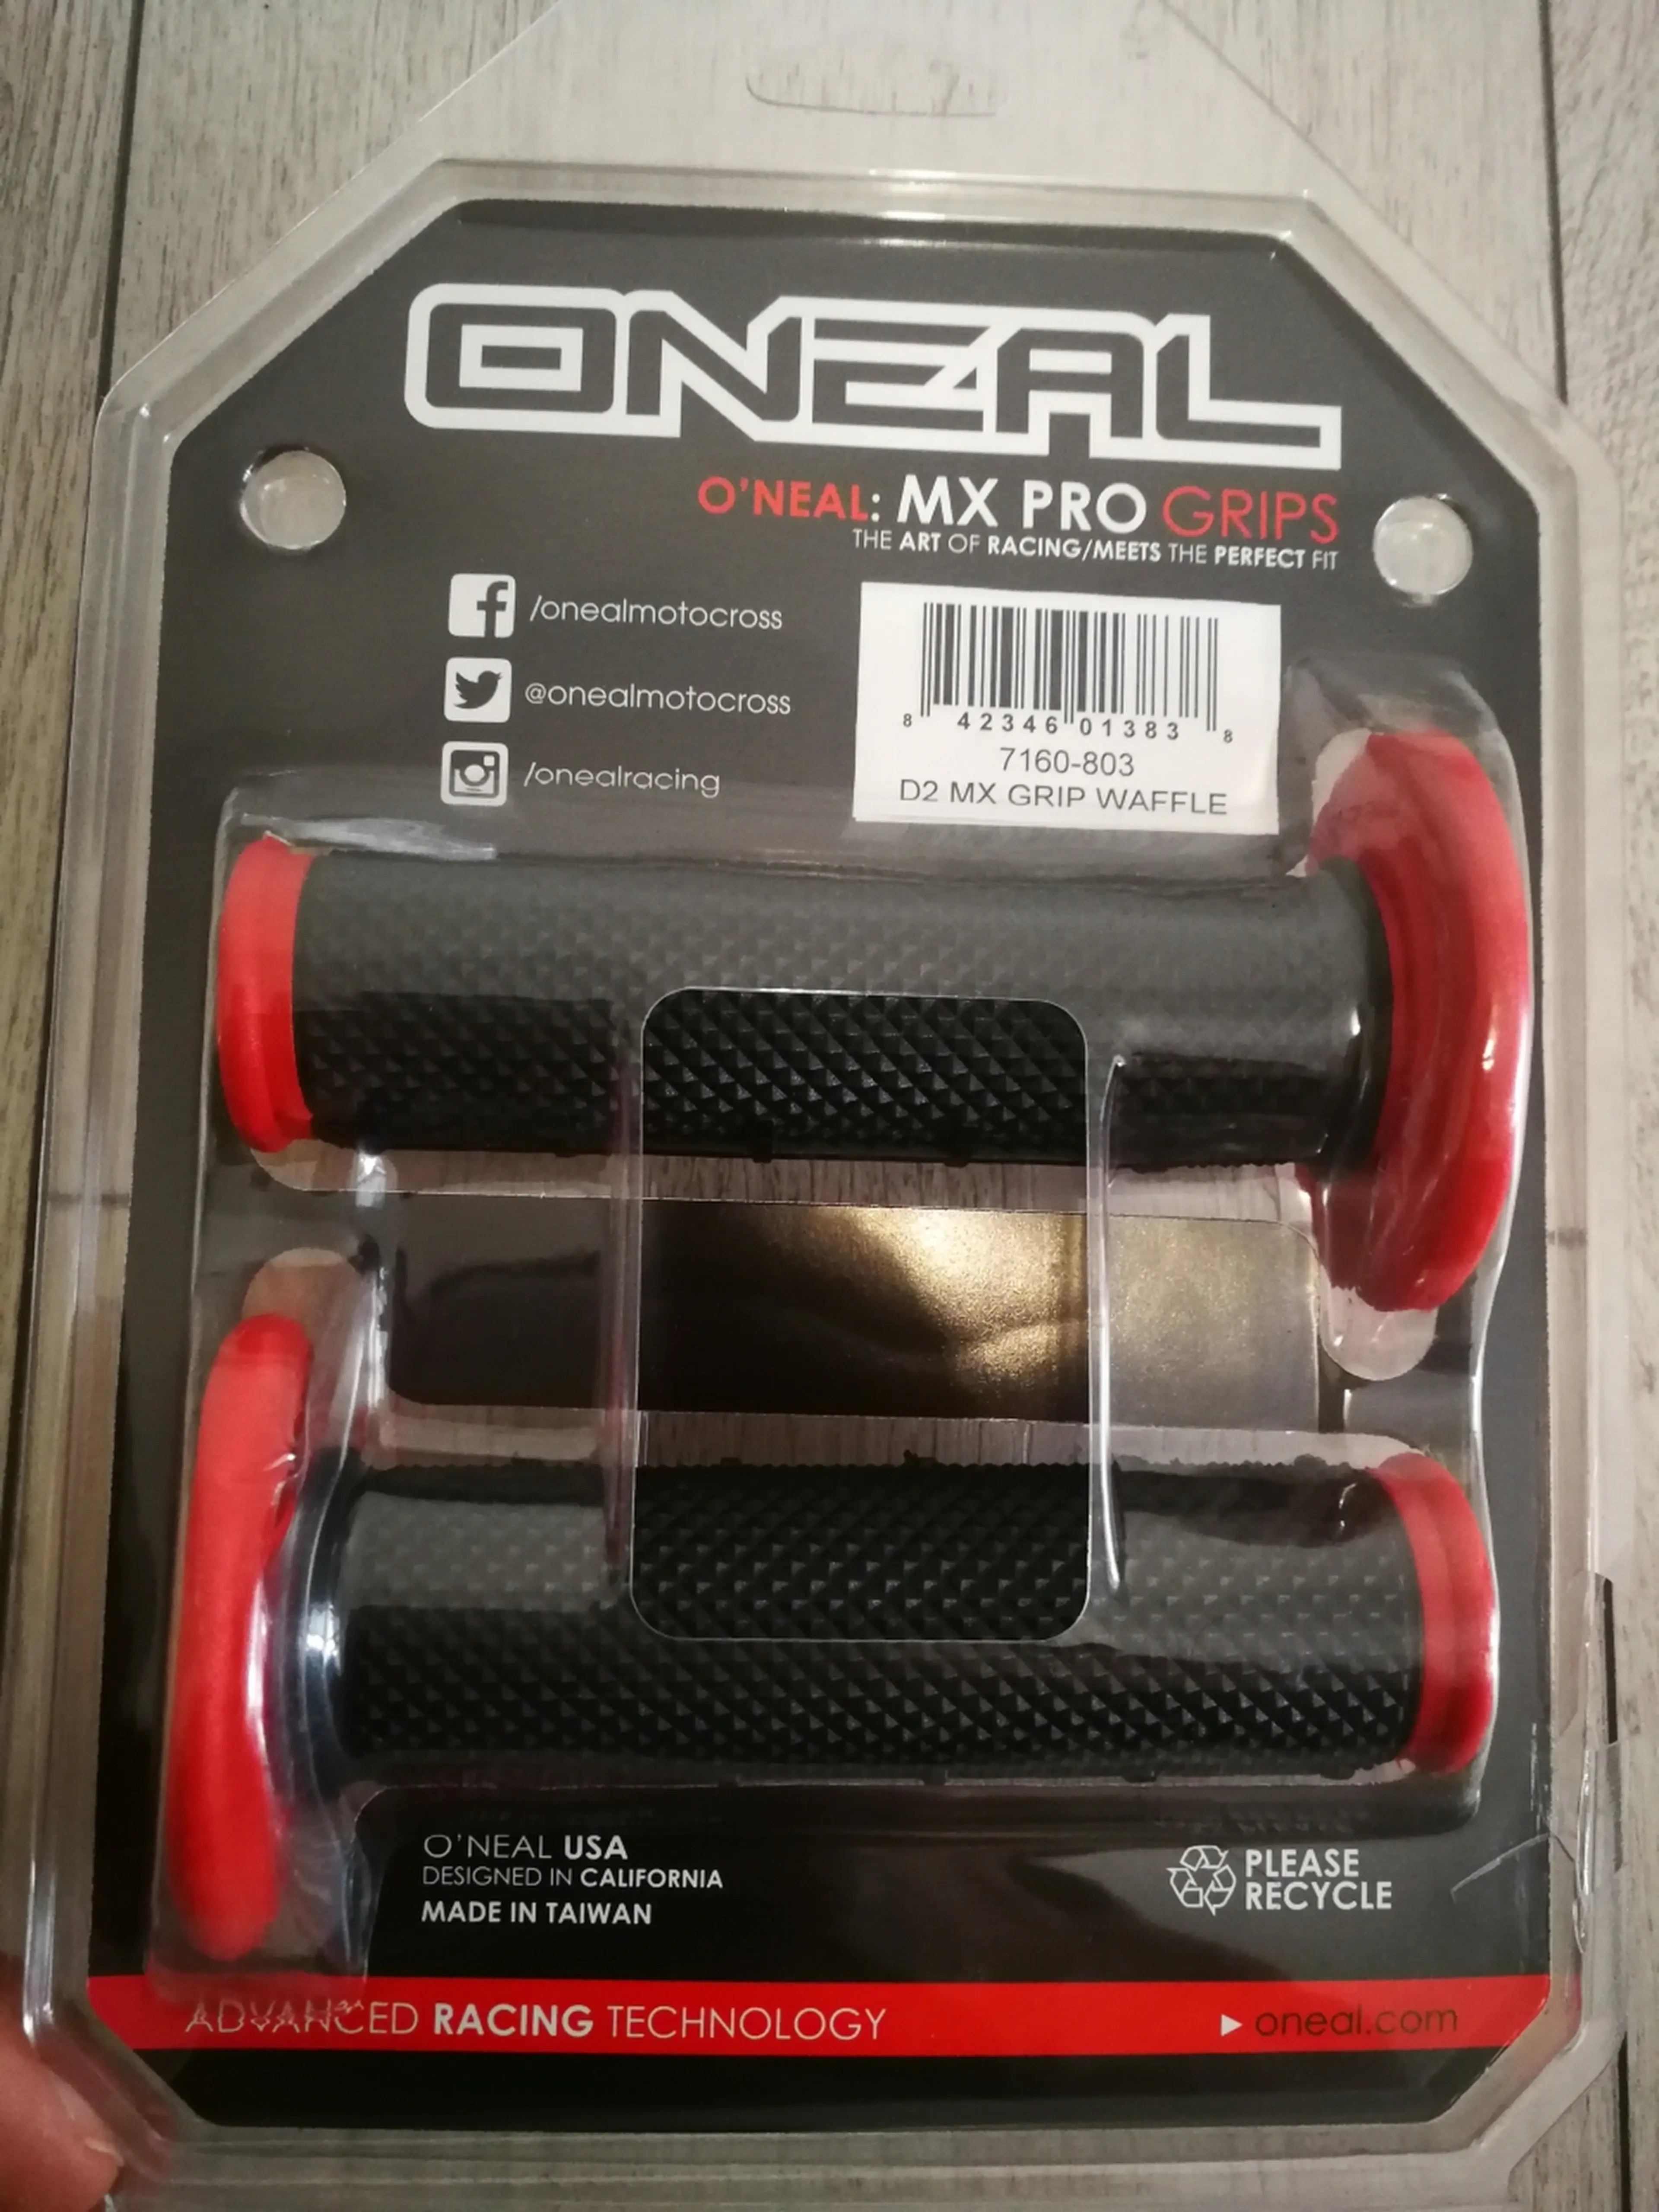 1. Oneal MX PRO